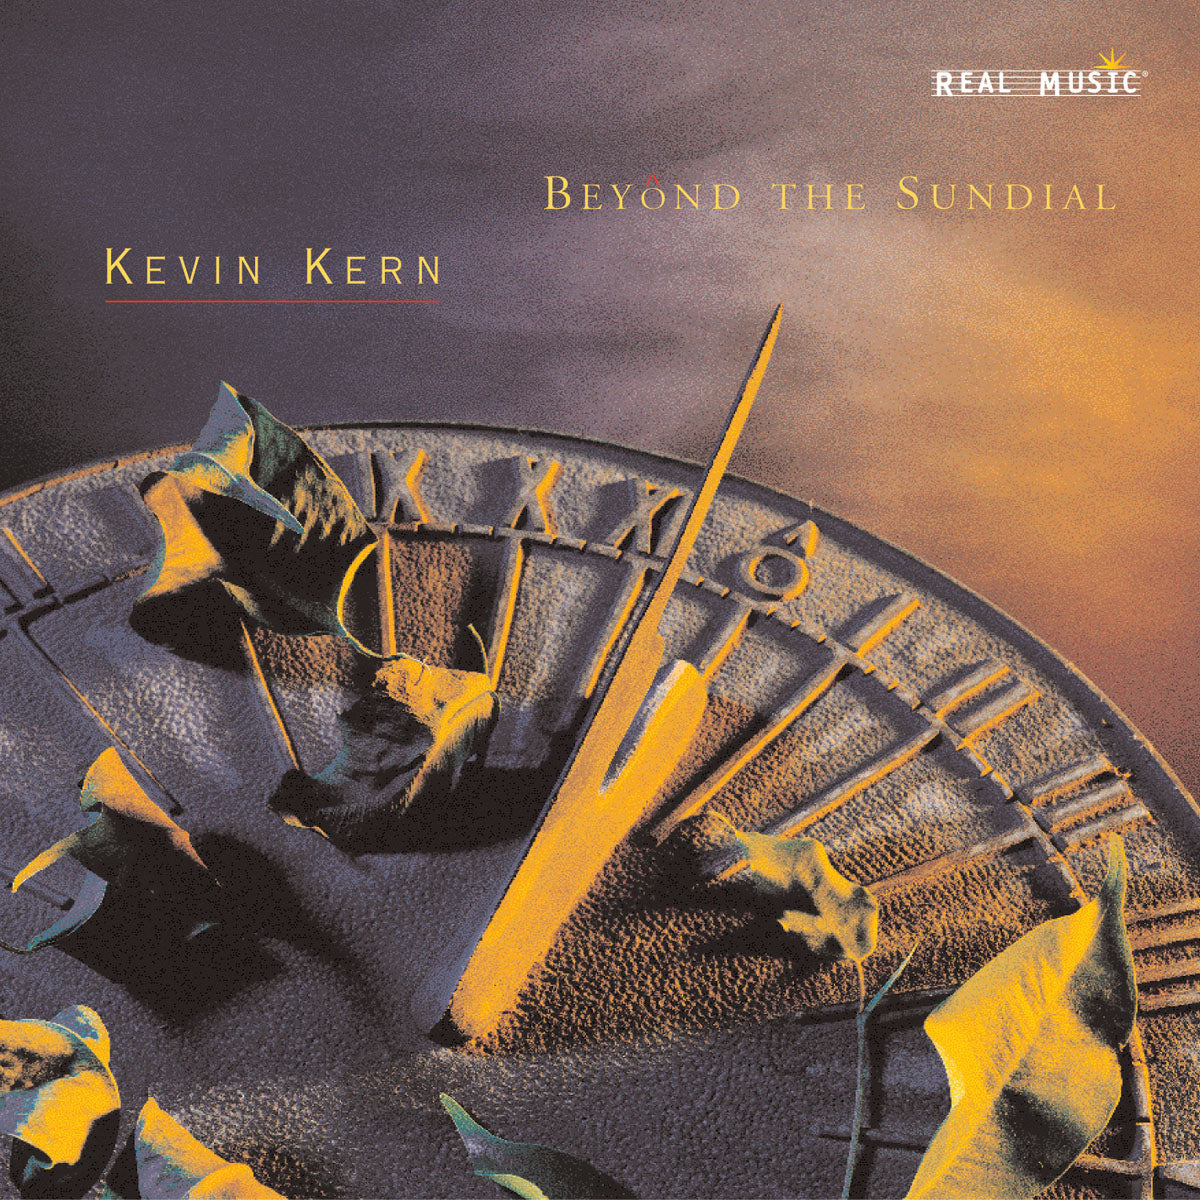 Beyond the Sundial by Kevin Kern, cd cover art